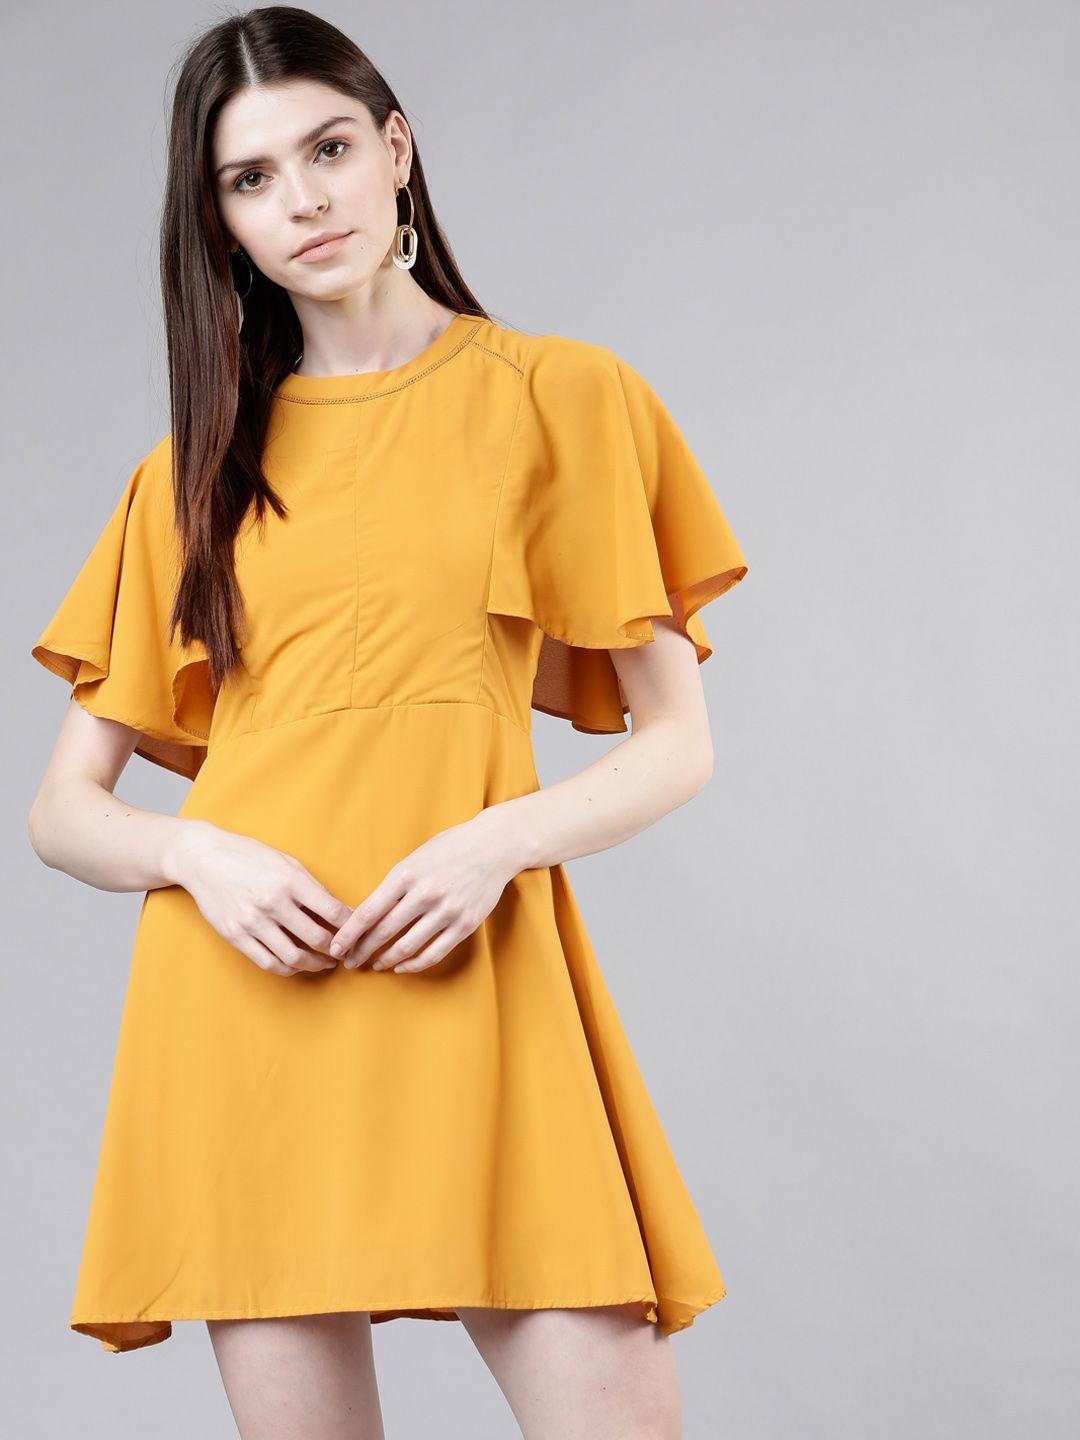 tokyo-talkies-women-solid-mustard-yellow-fit-and-flare-dress